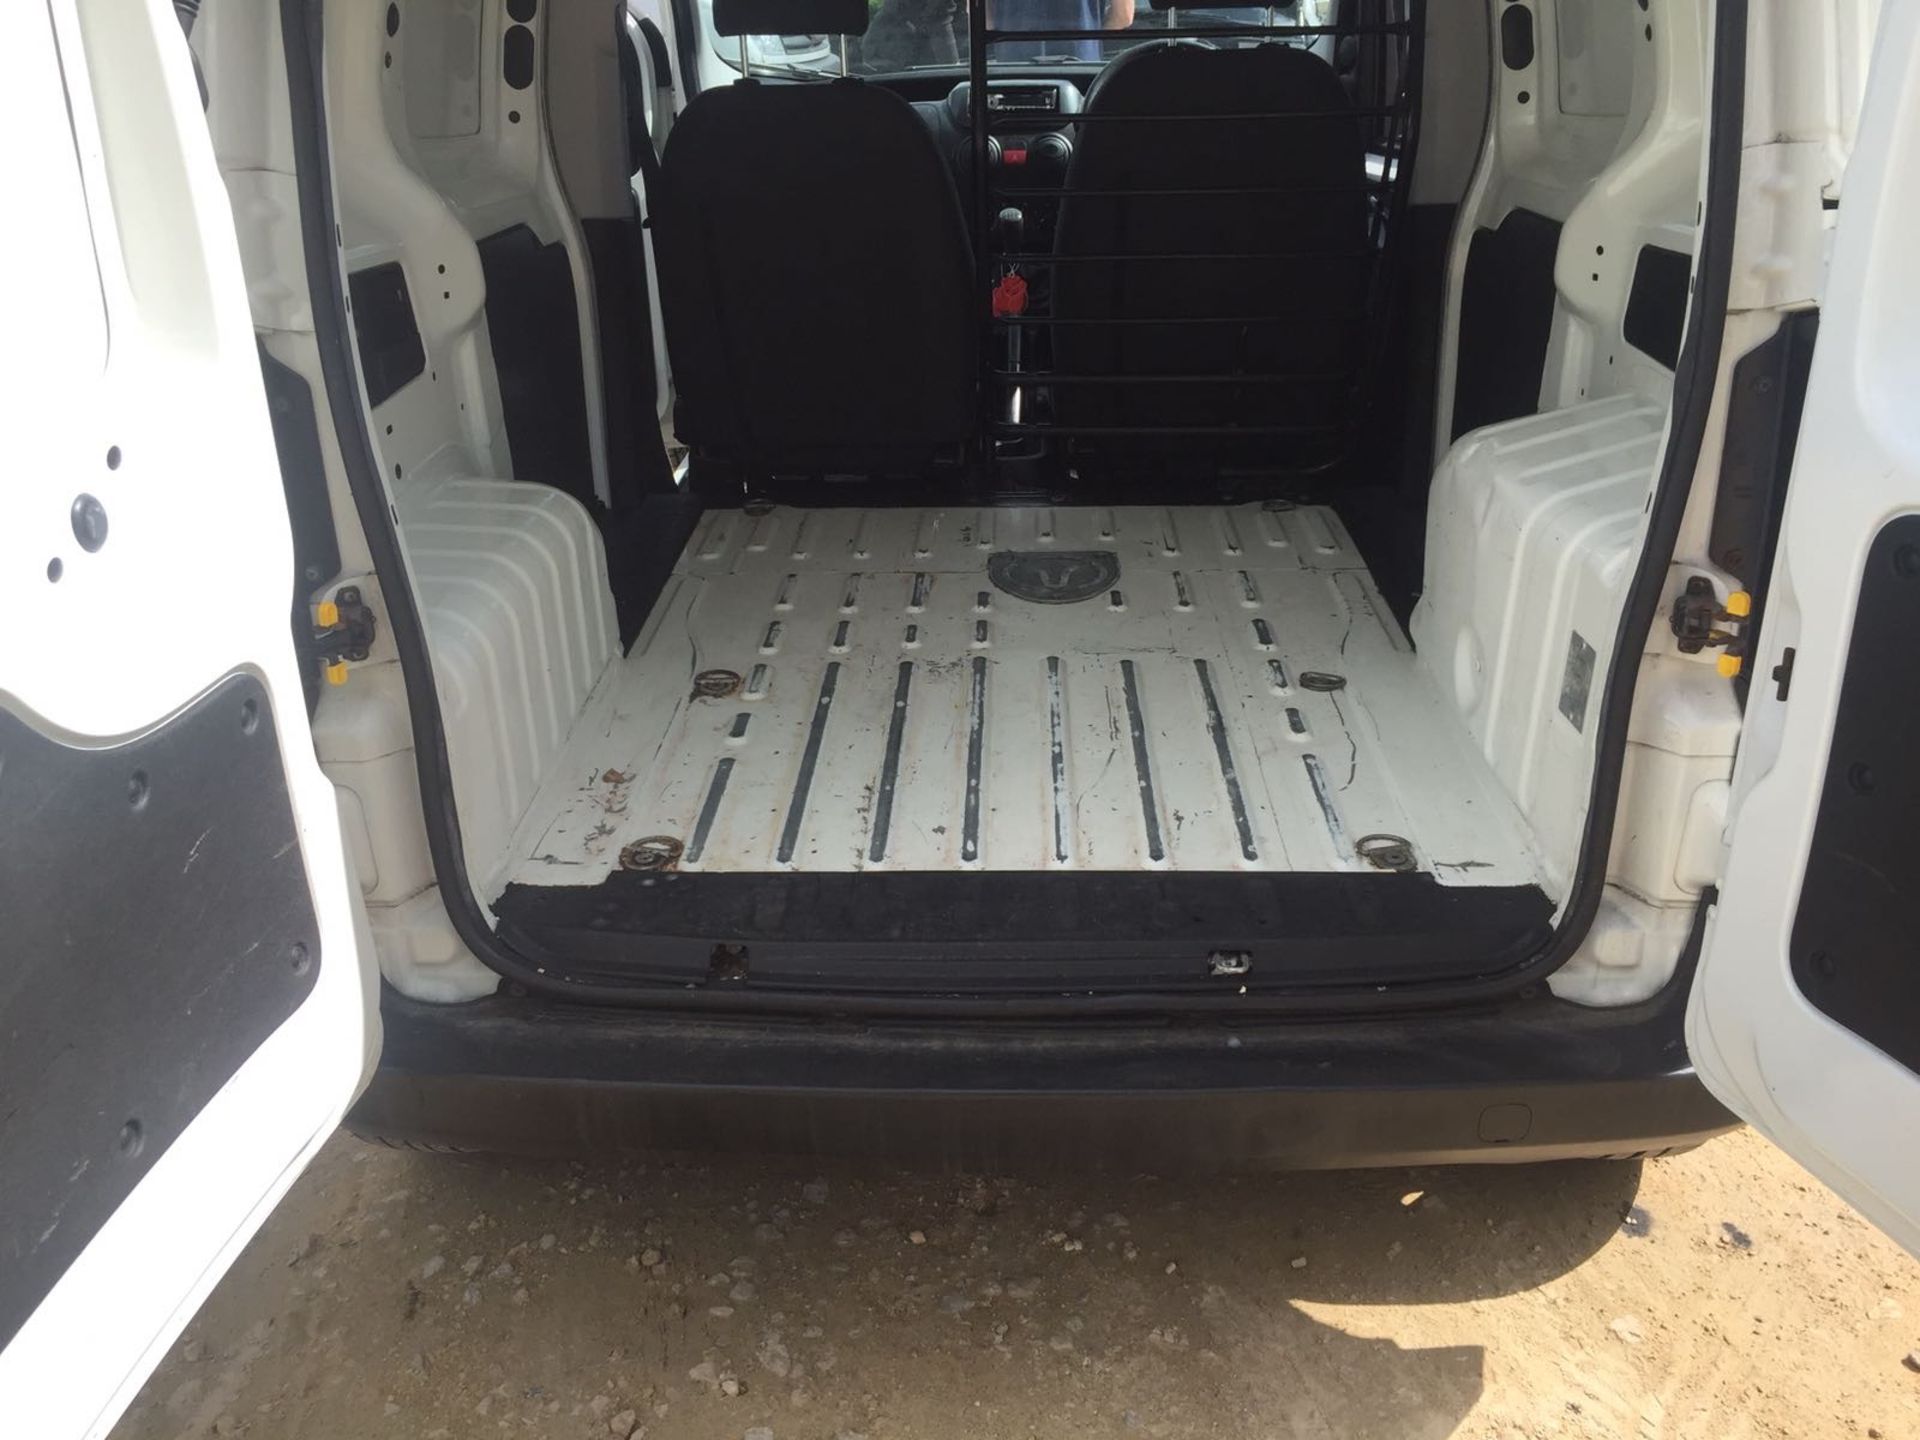 2012/12 REG PEUGEOT BIPPER S HDI, FULL SERVICE HISTORY, SHOWING 1 OWNER - Image 6 of 6